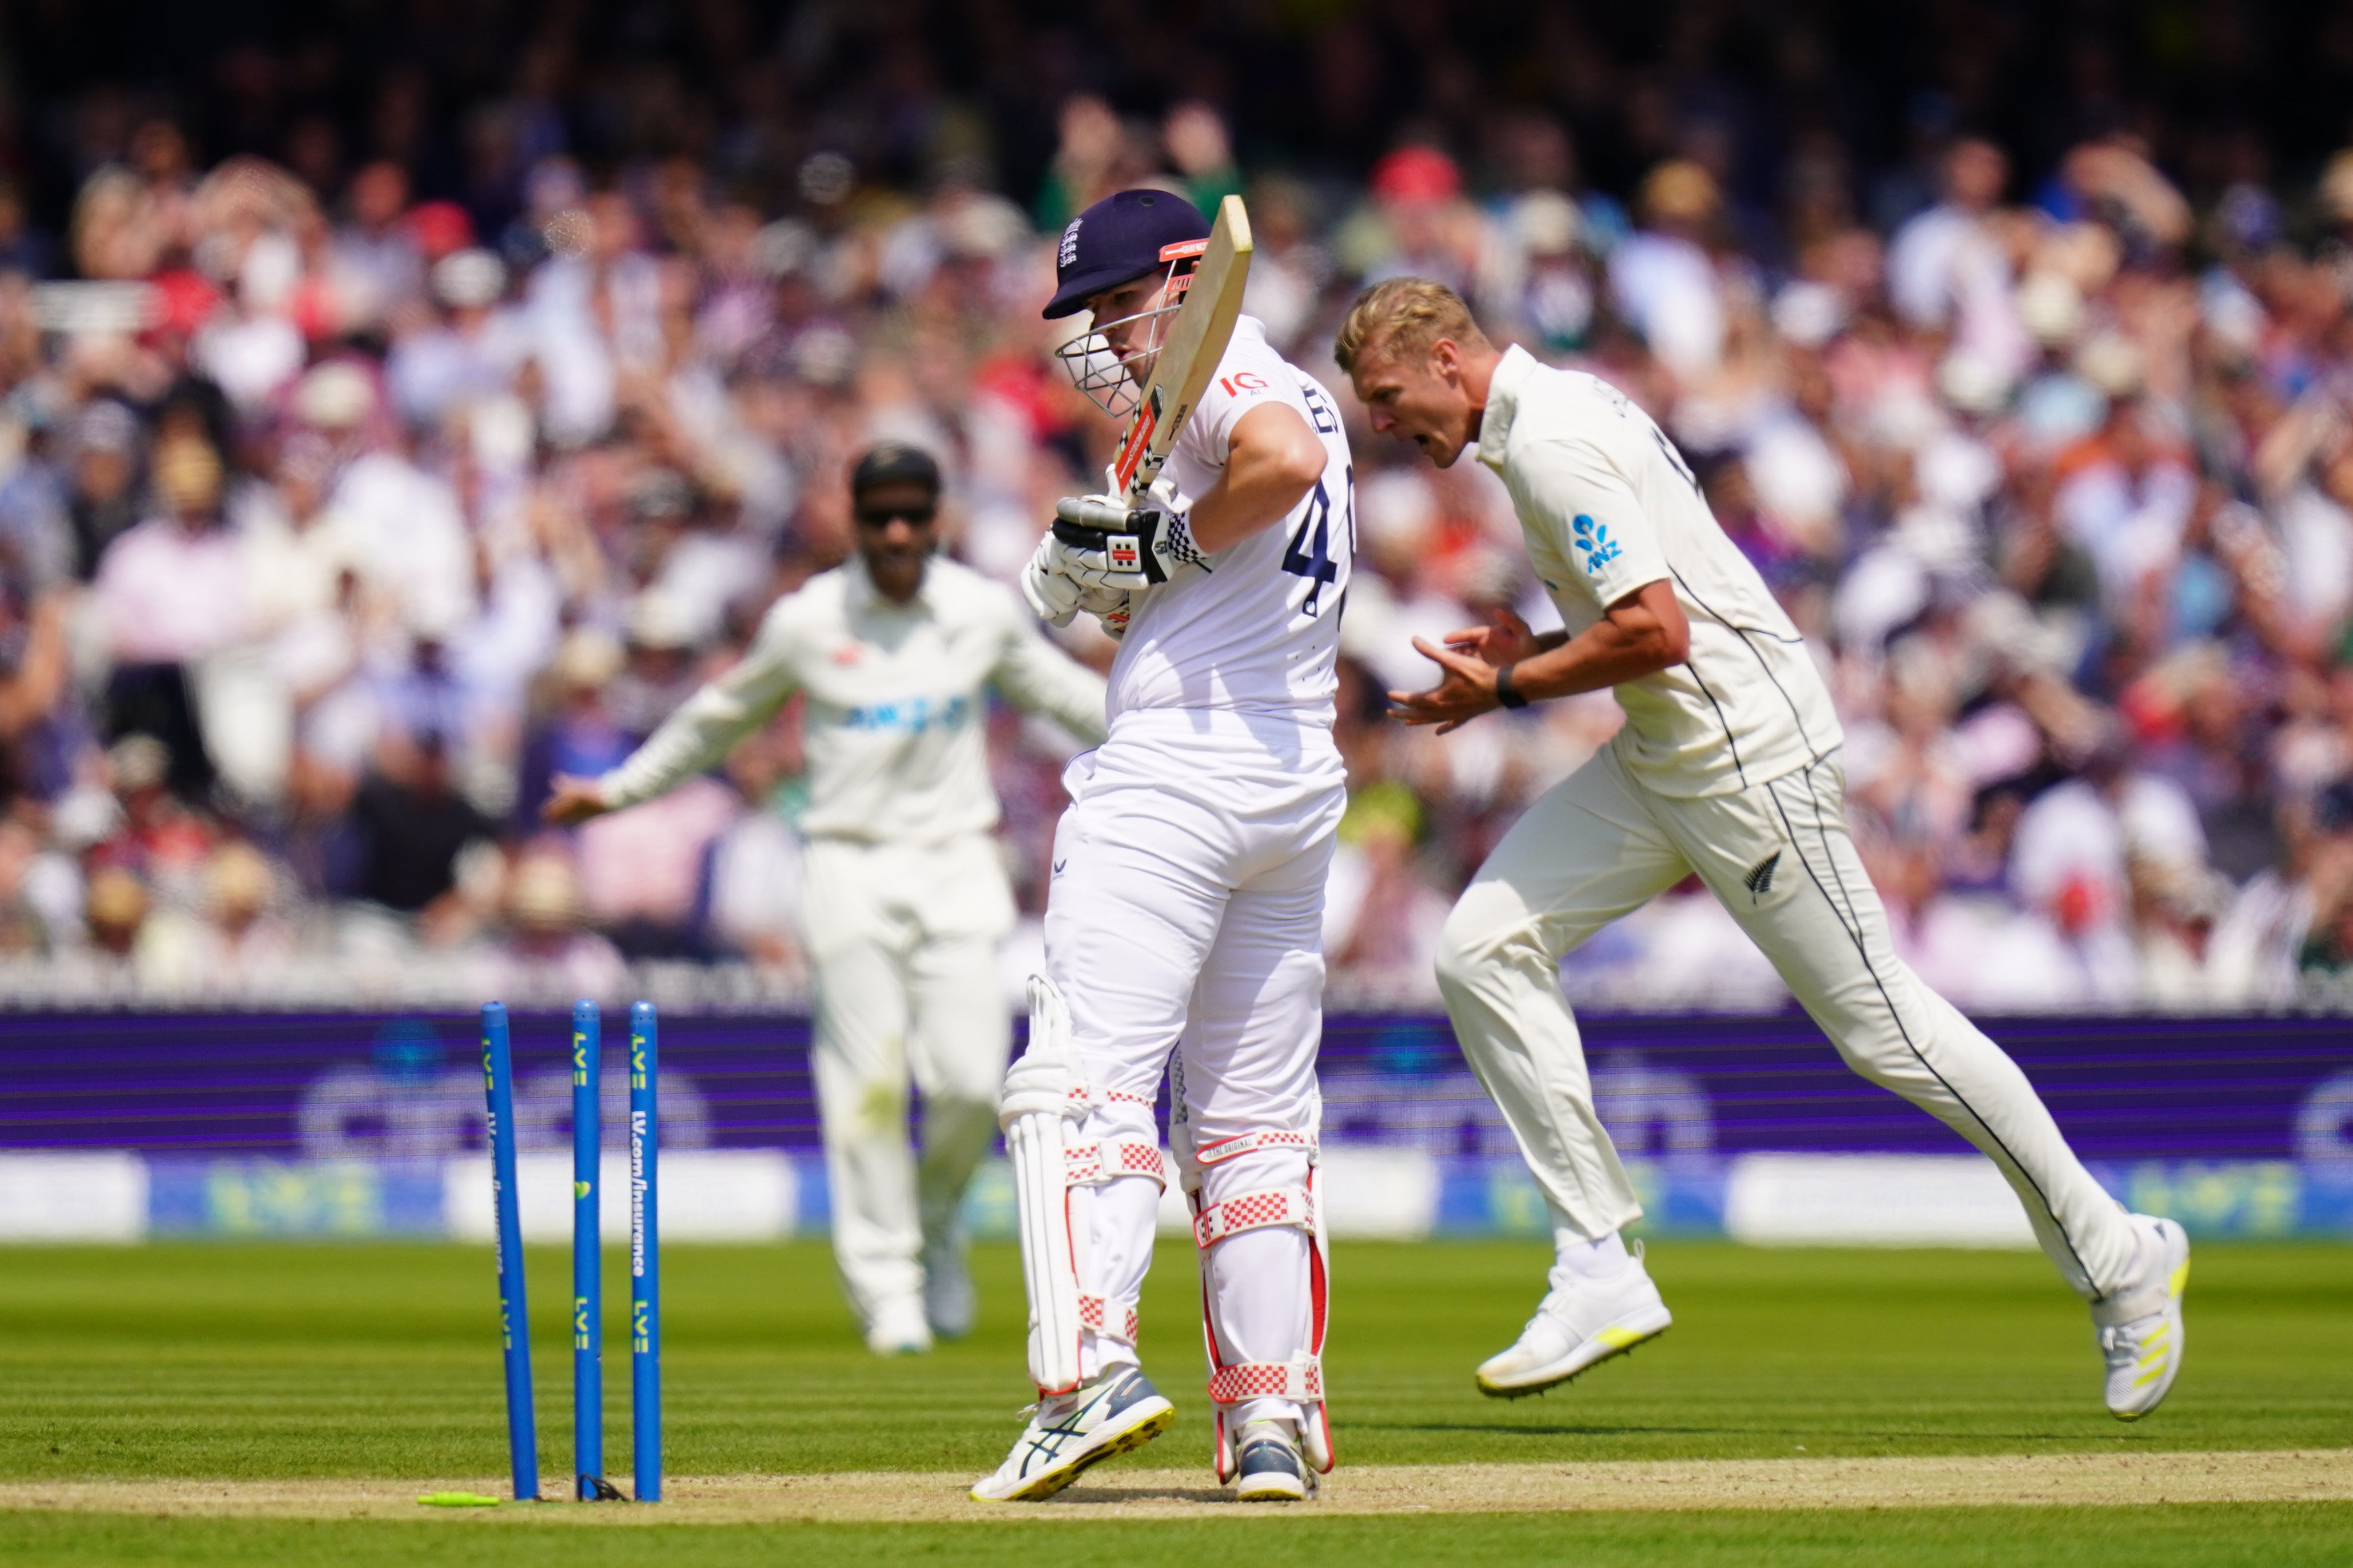 England’s Alex Lees was dismissed by Kyle Jamieson (Adam Davy/PA)